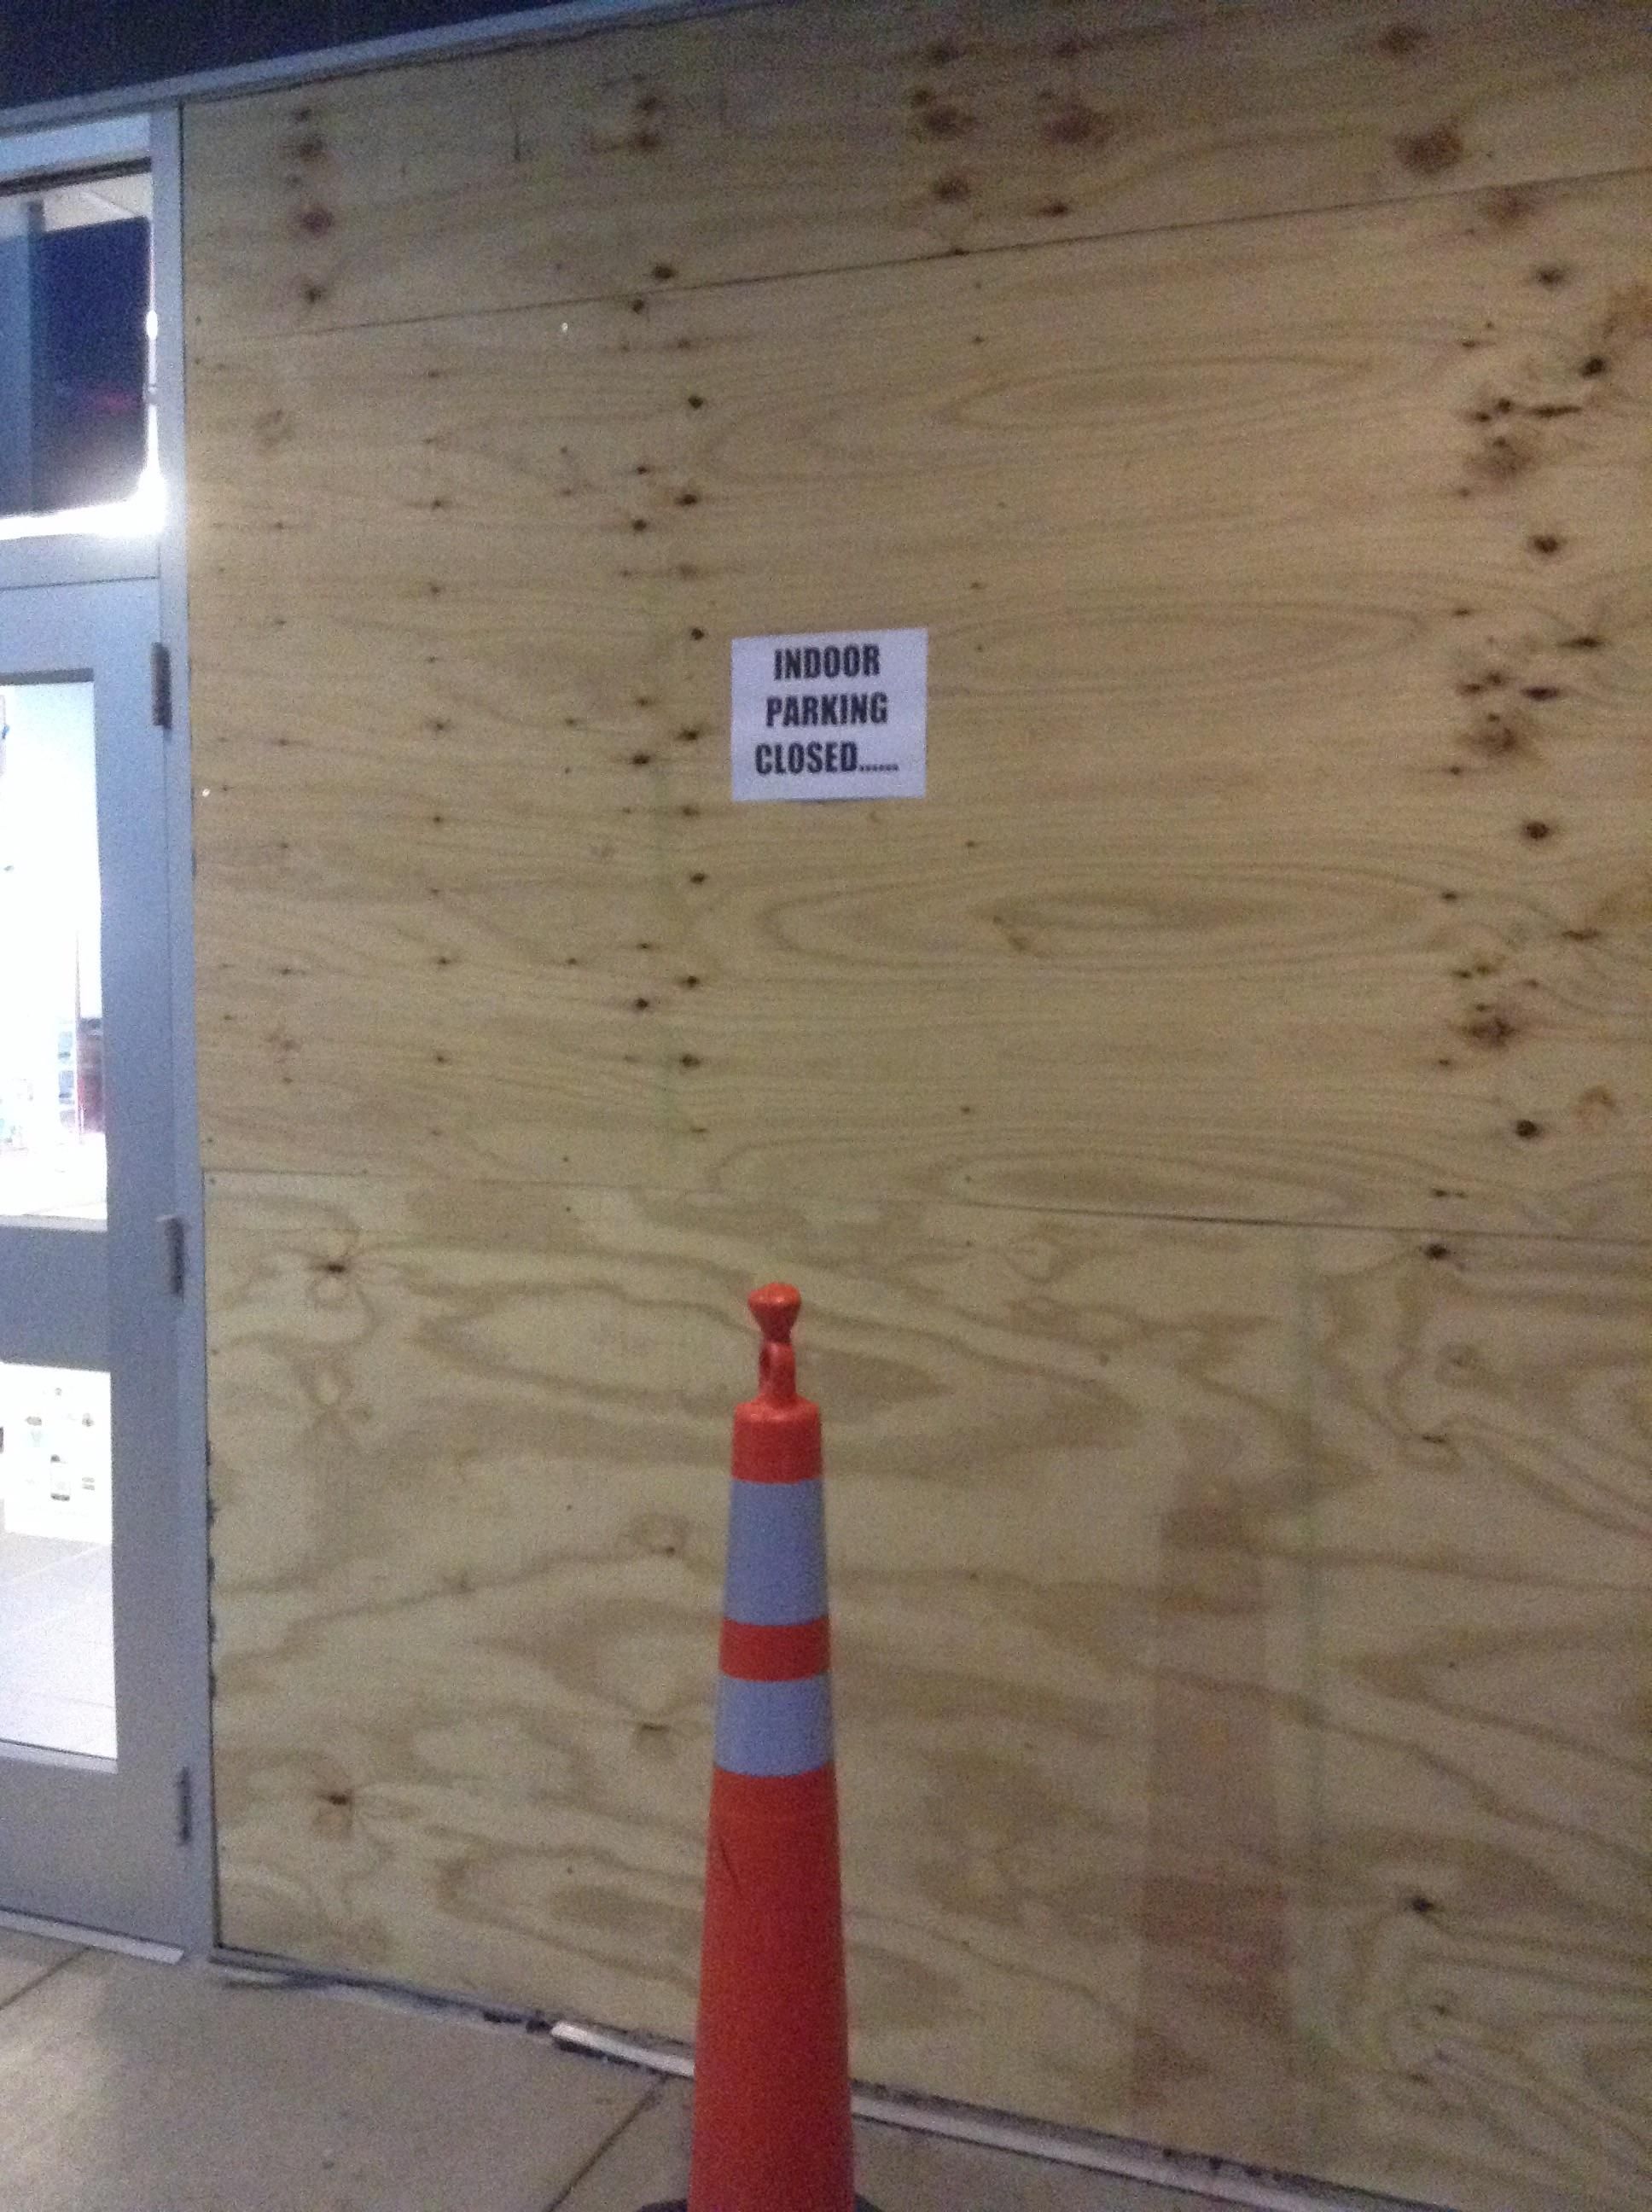 A car recently crashed through the front of a movie theater near where I live. This is the sign they posted.